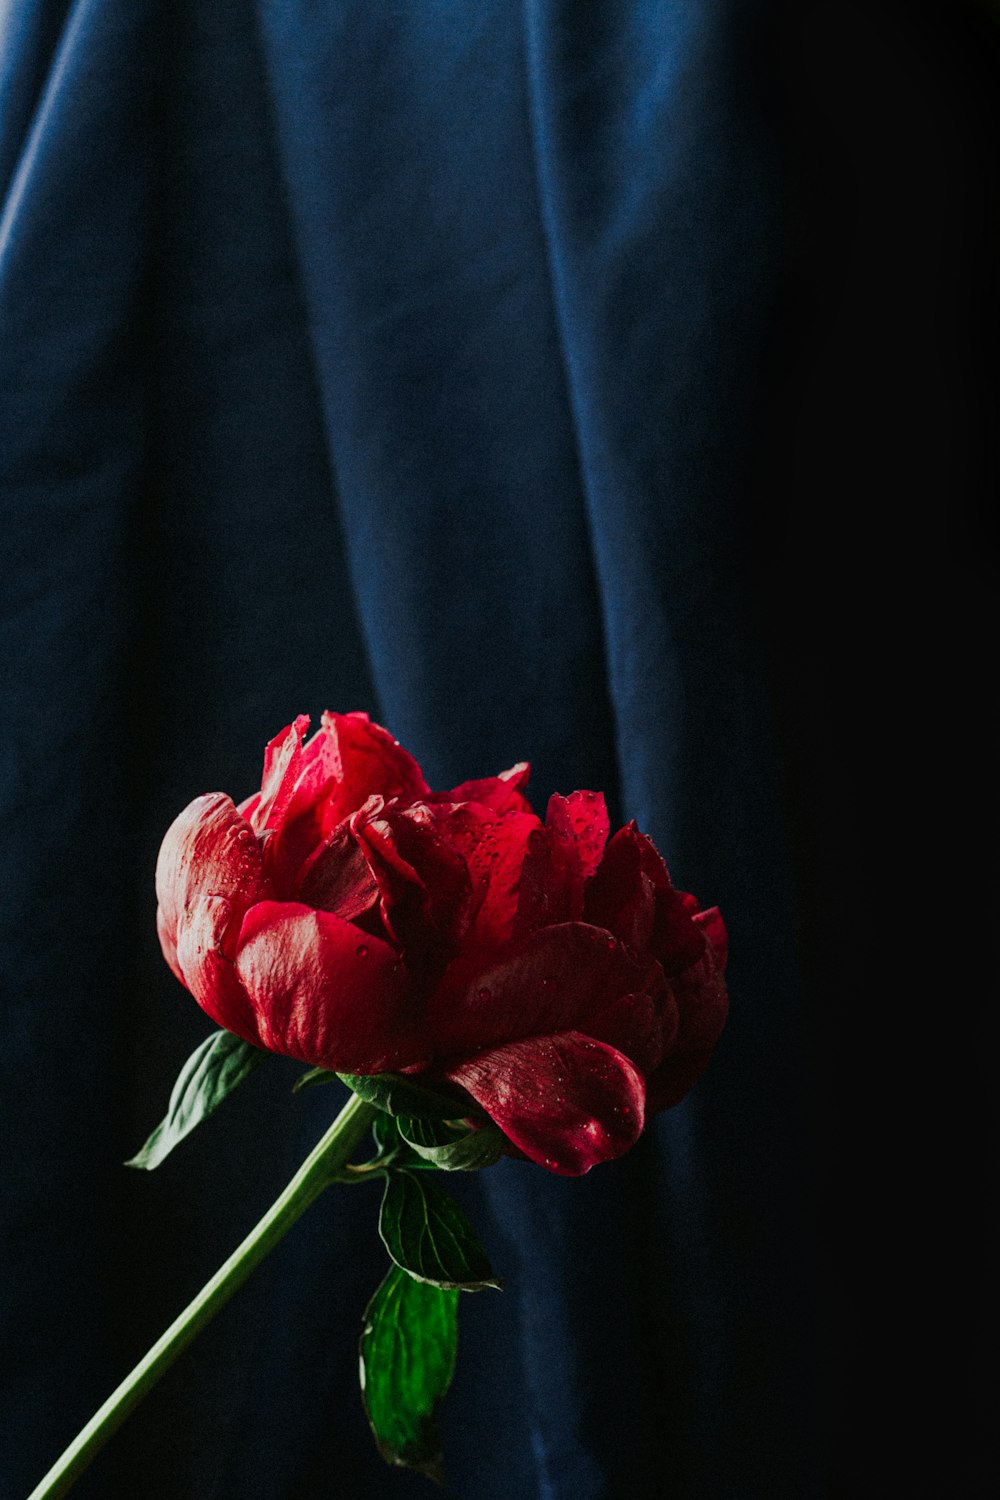 red rose on blue textile